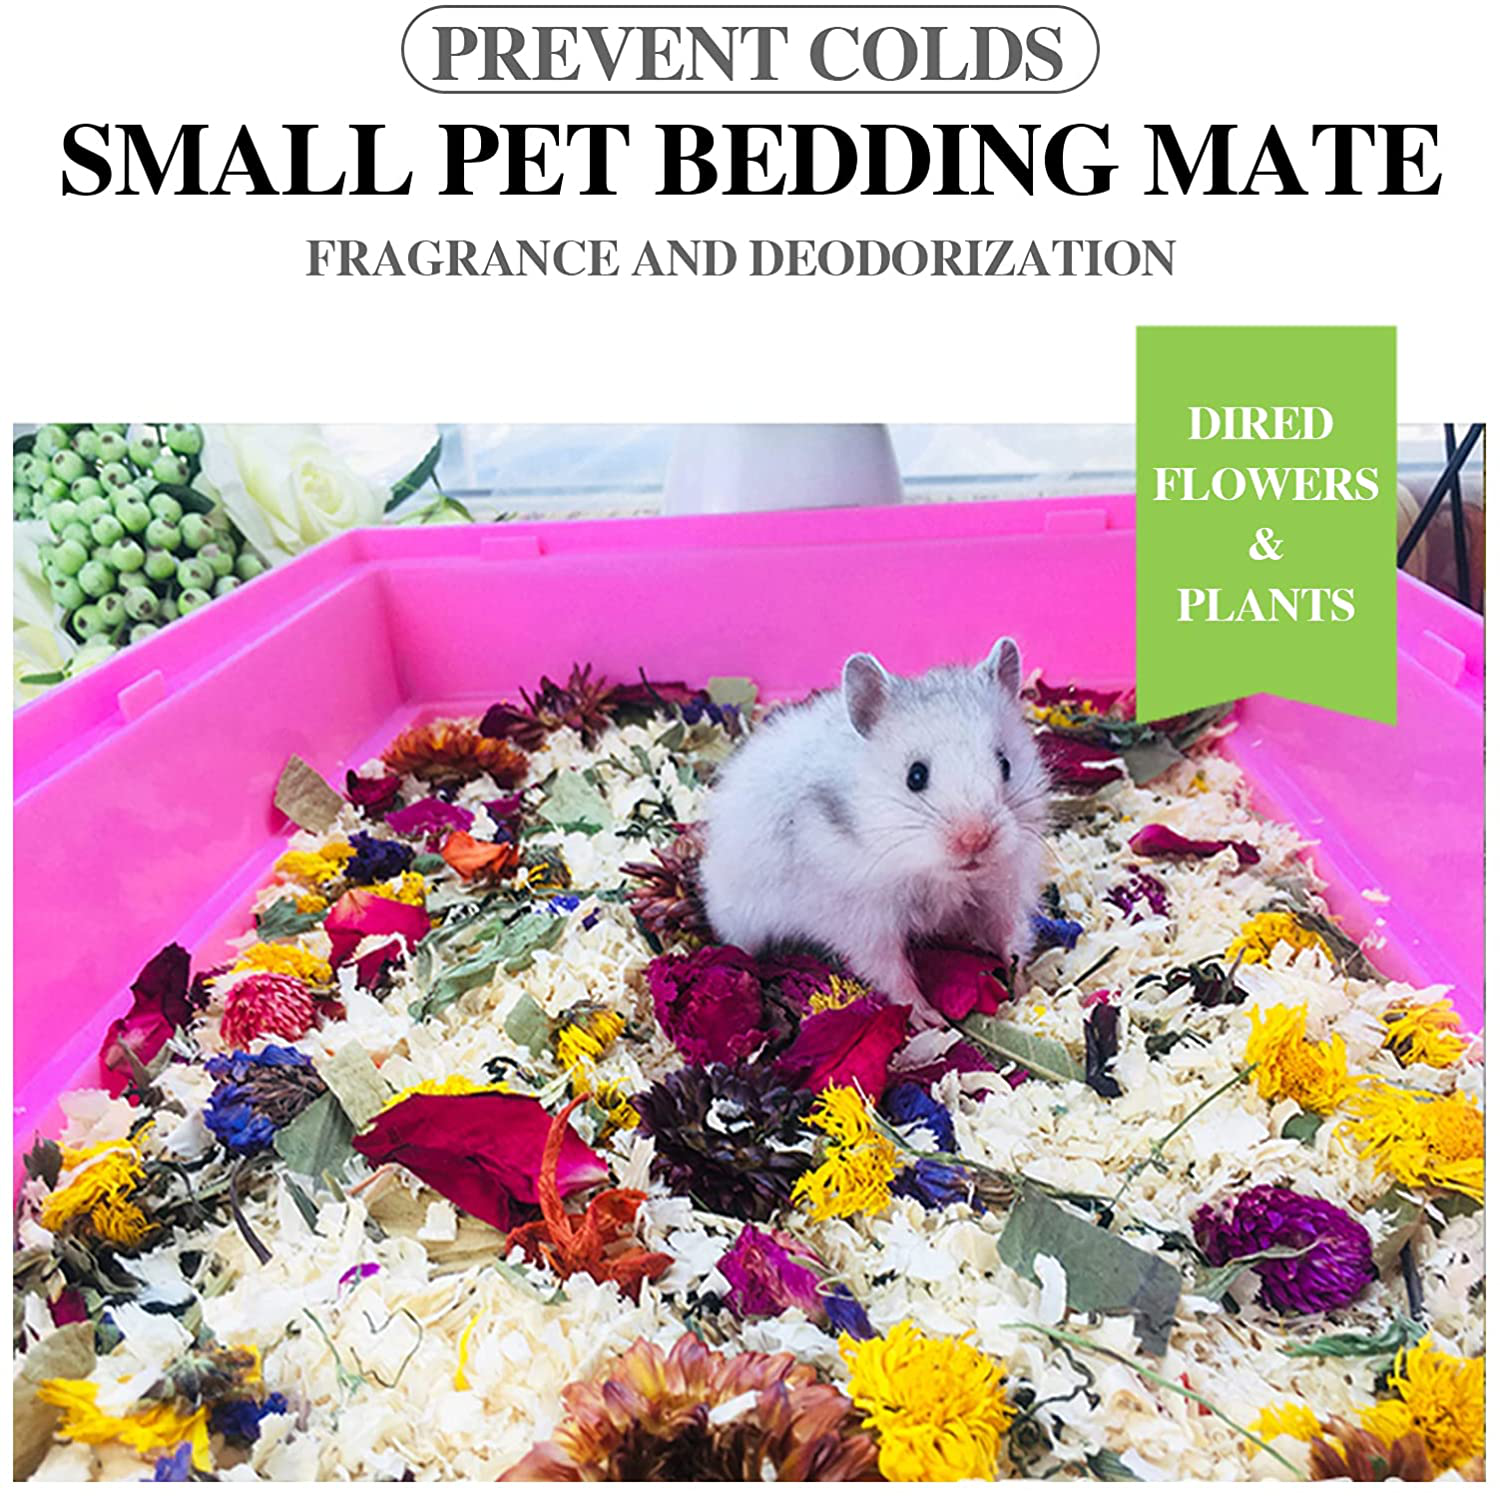 LIU NING Small Pet Bedding Mate,Small Animal Bedding Mixed Dired Flower and Grass Bedding,Small Animal Bedding and Litter for Rabbit,Guinea Pig,Ideal Rat,Hamster,0.7 Ounce (Pack of 8)